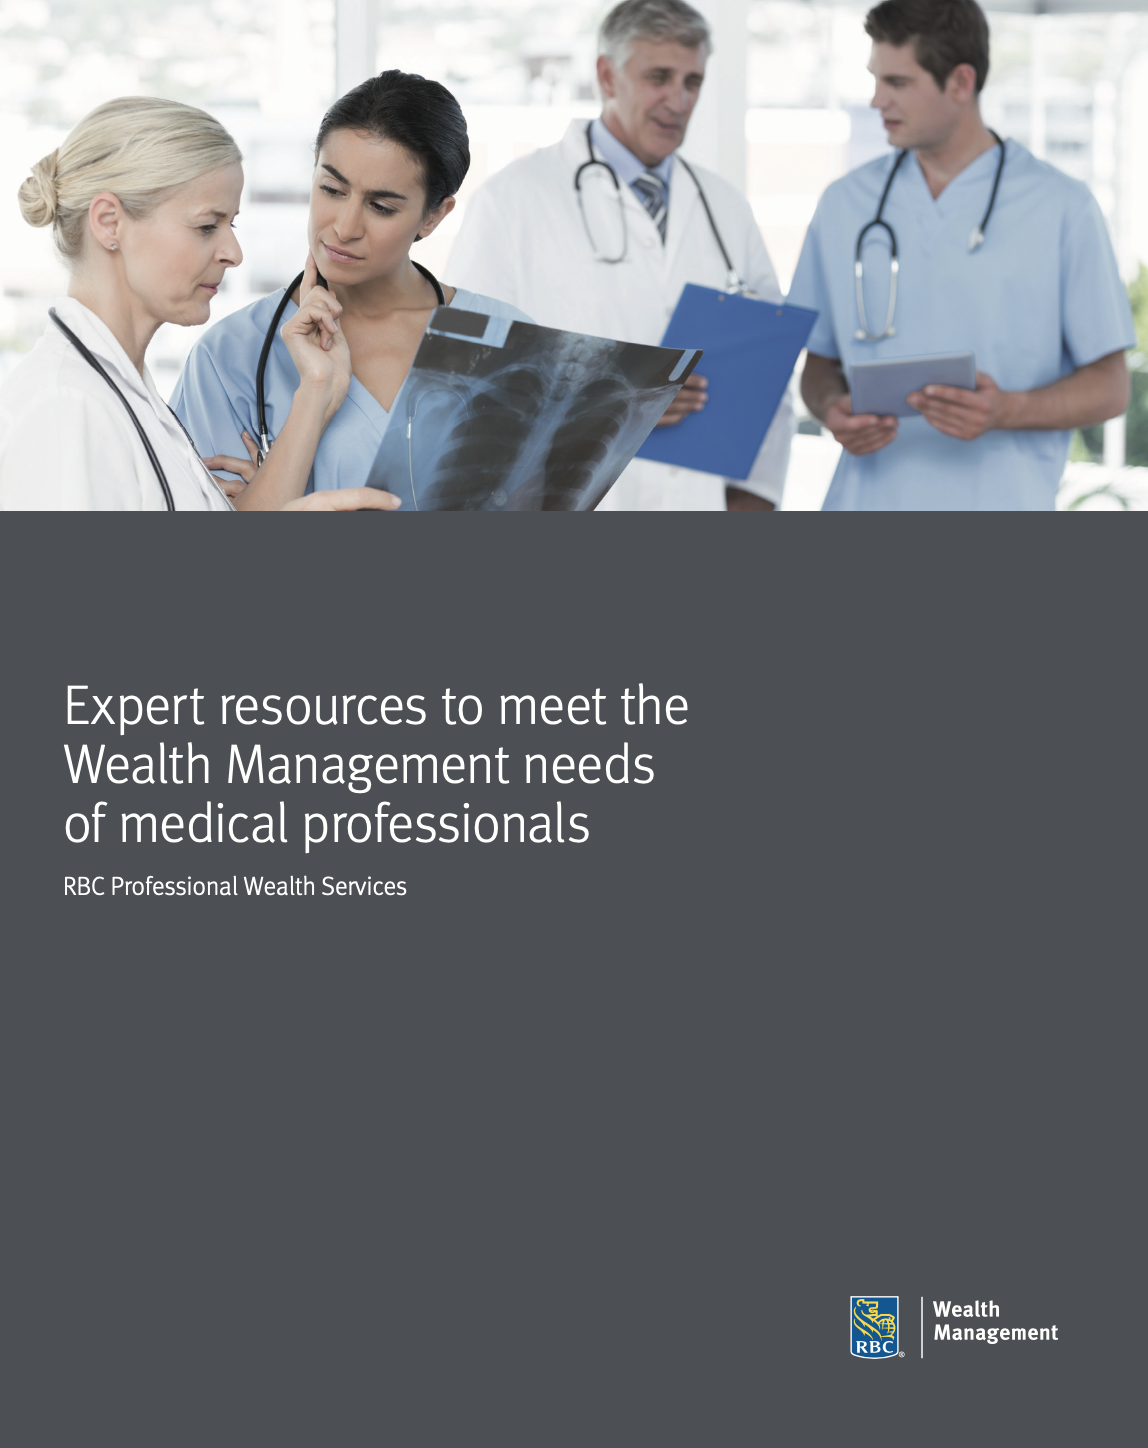 medical professionals brochure in page with medical professionals standing around a table talking